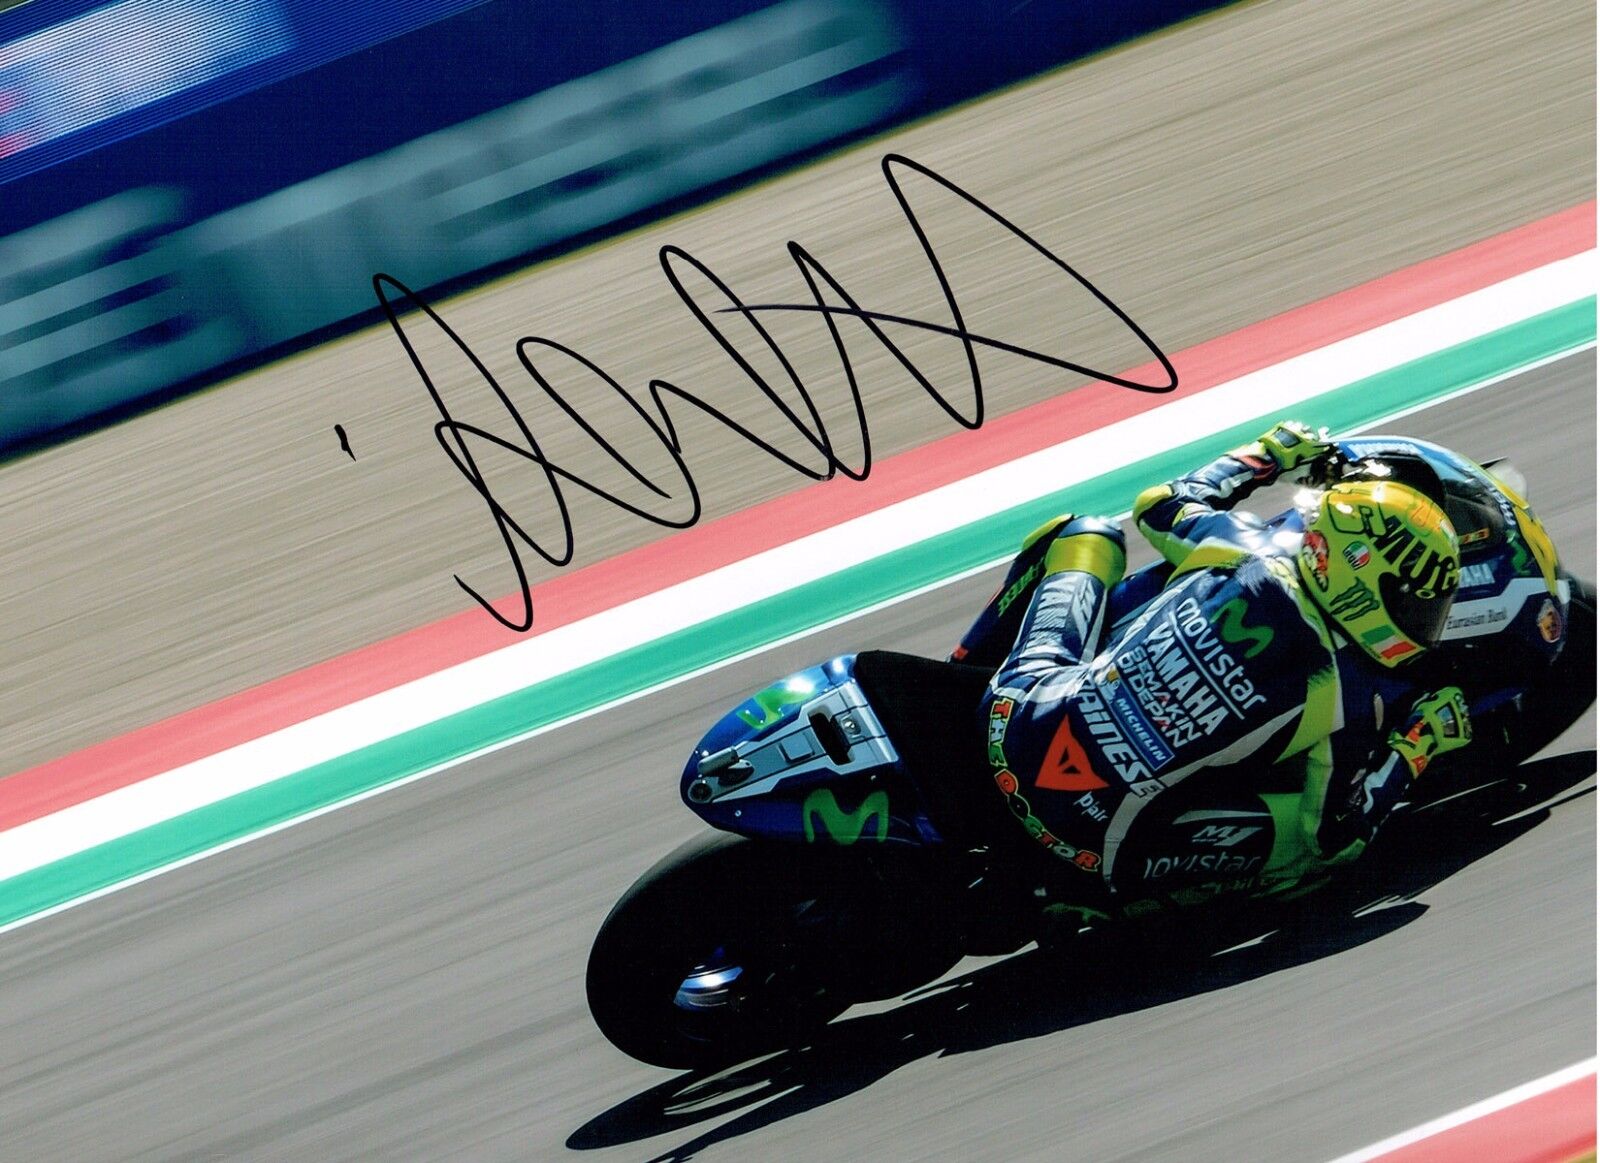 VALENTINO ROSSI Autograph SIGNED 16x12 RARE Yamaha Photo Poster painting AFTAL COA VALE